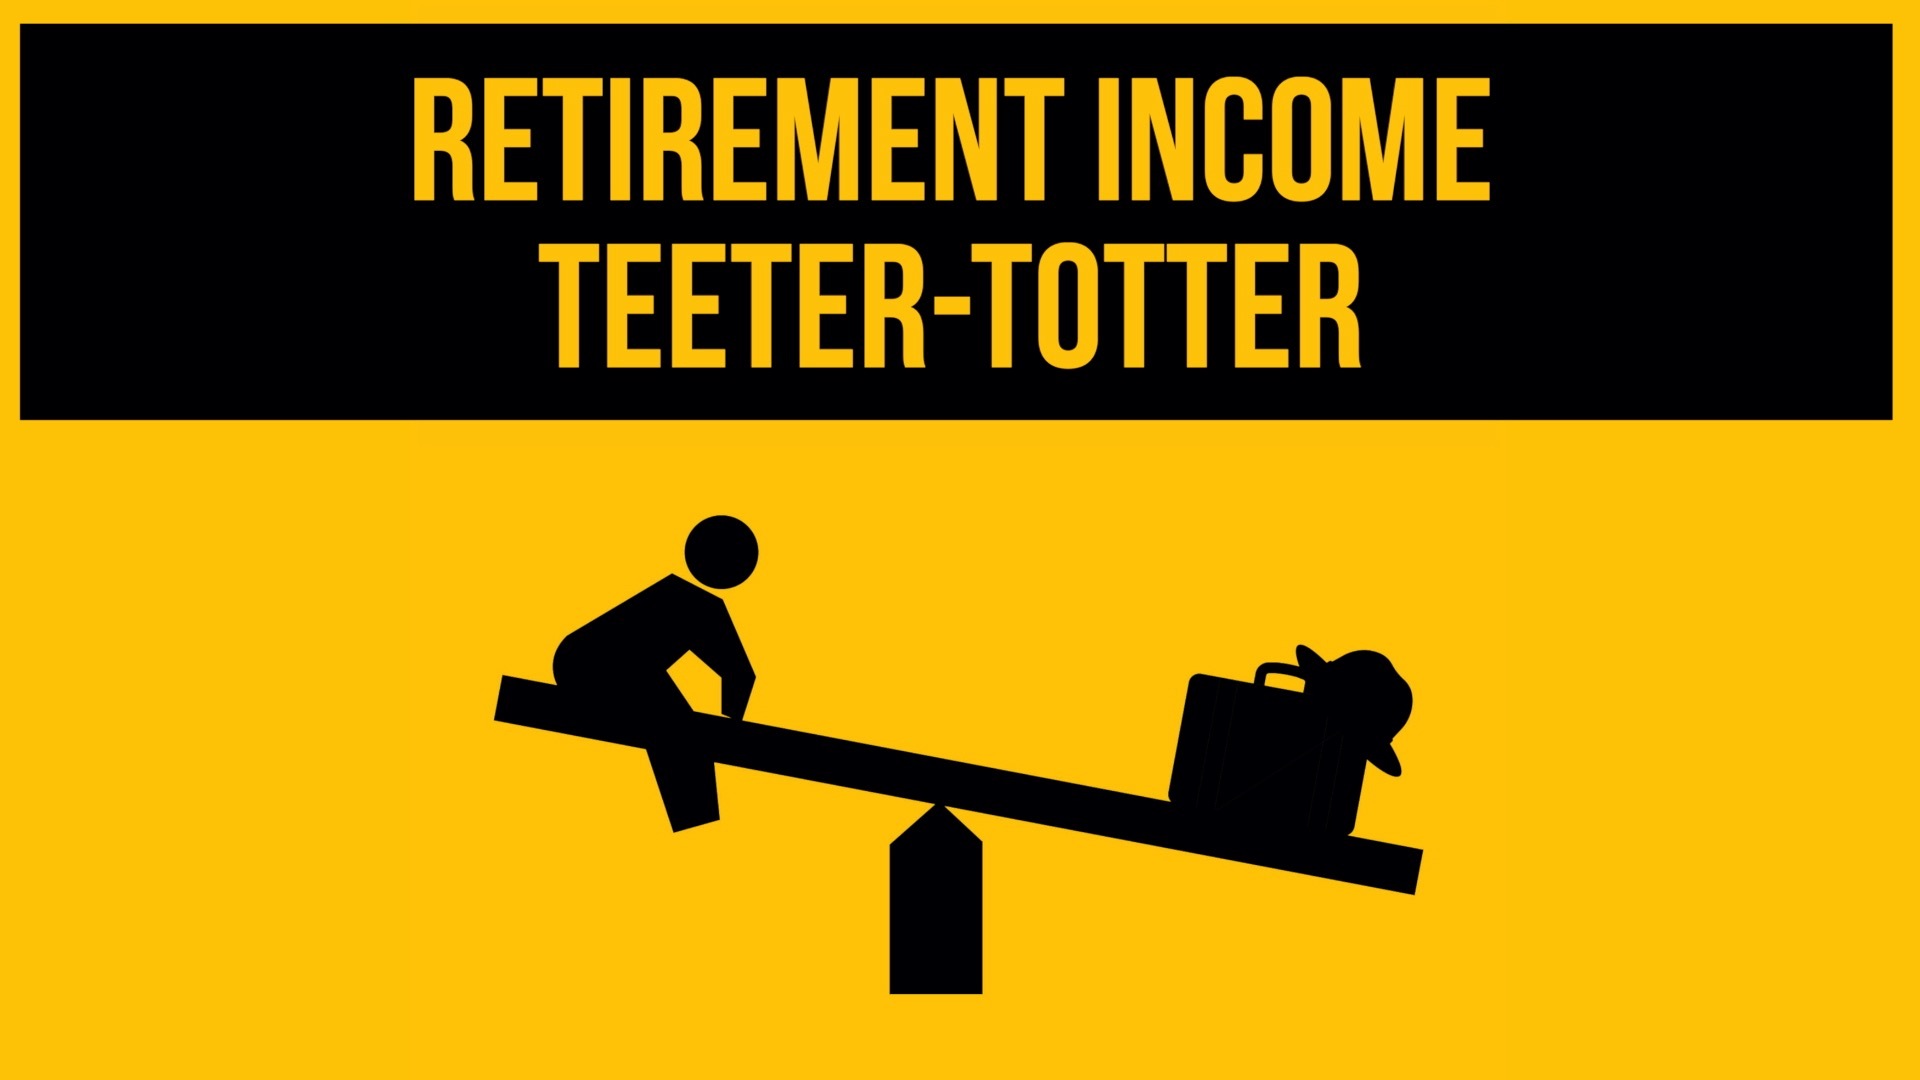 [NEW] Lead Gen Campaign | Retirement Income Teeter-Totter